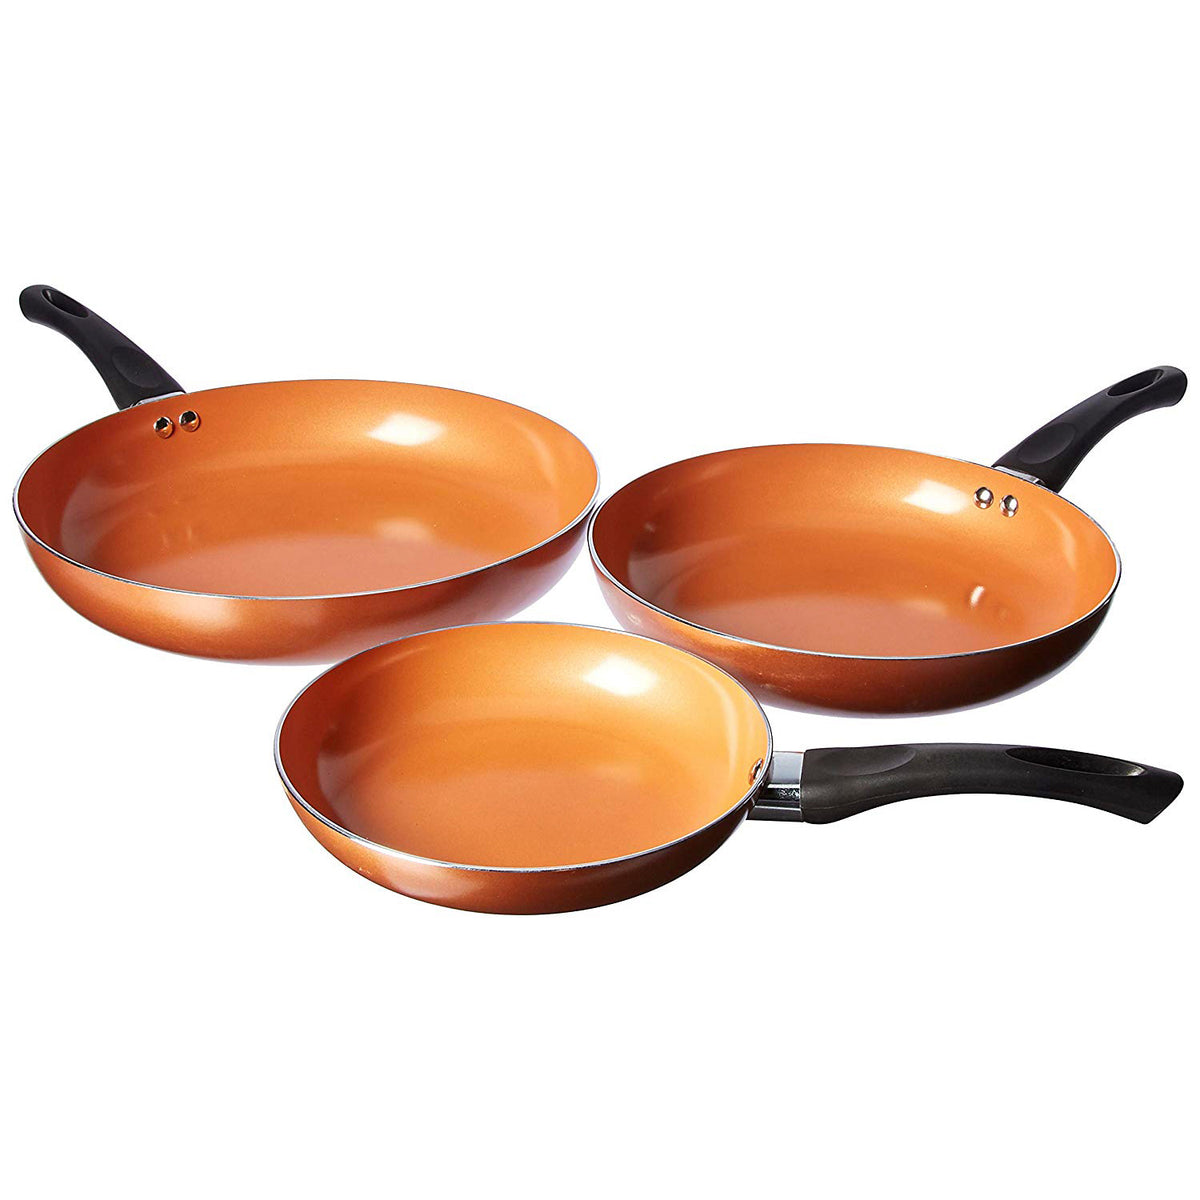 Healthy Nonstick Ceramic Coated Frying Pan - 3 Pcs Eco Friendly Durable Fry  Pan Cookware Set (8, 10 & 12 Pans) (Copper Stainless Steel)